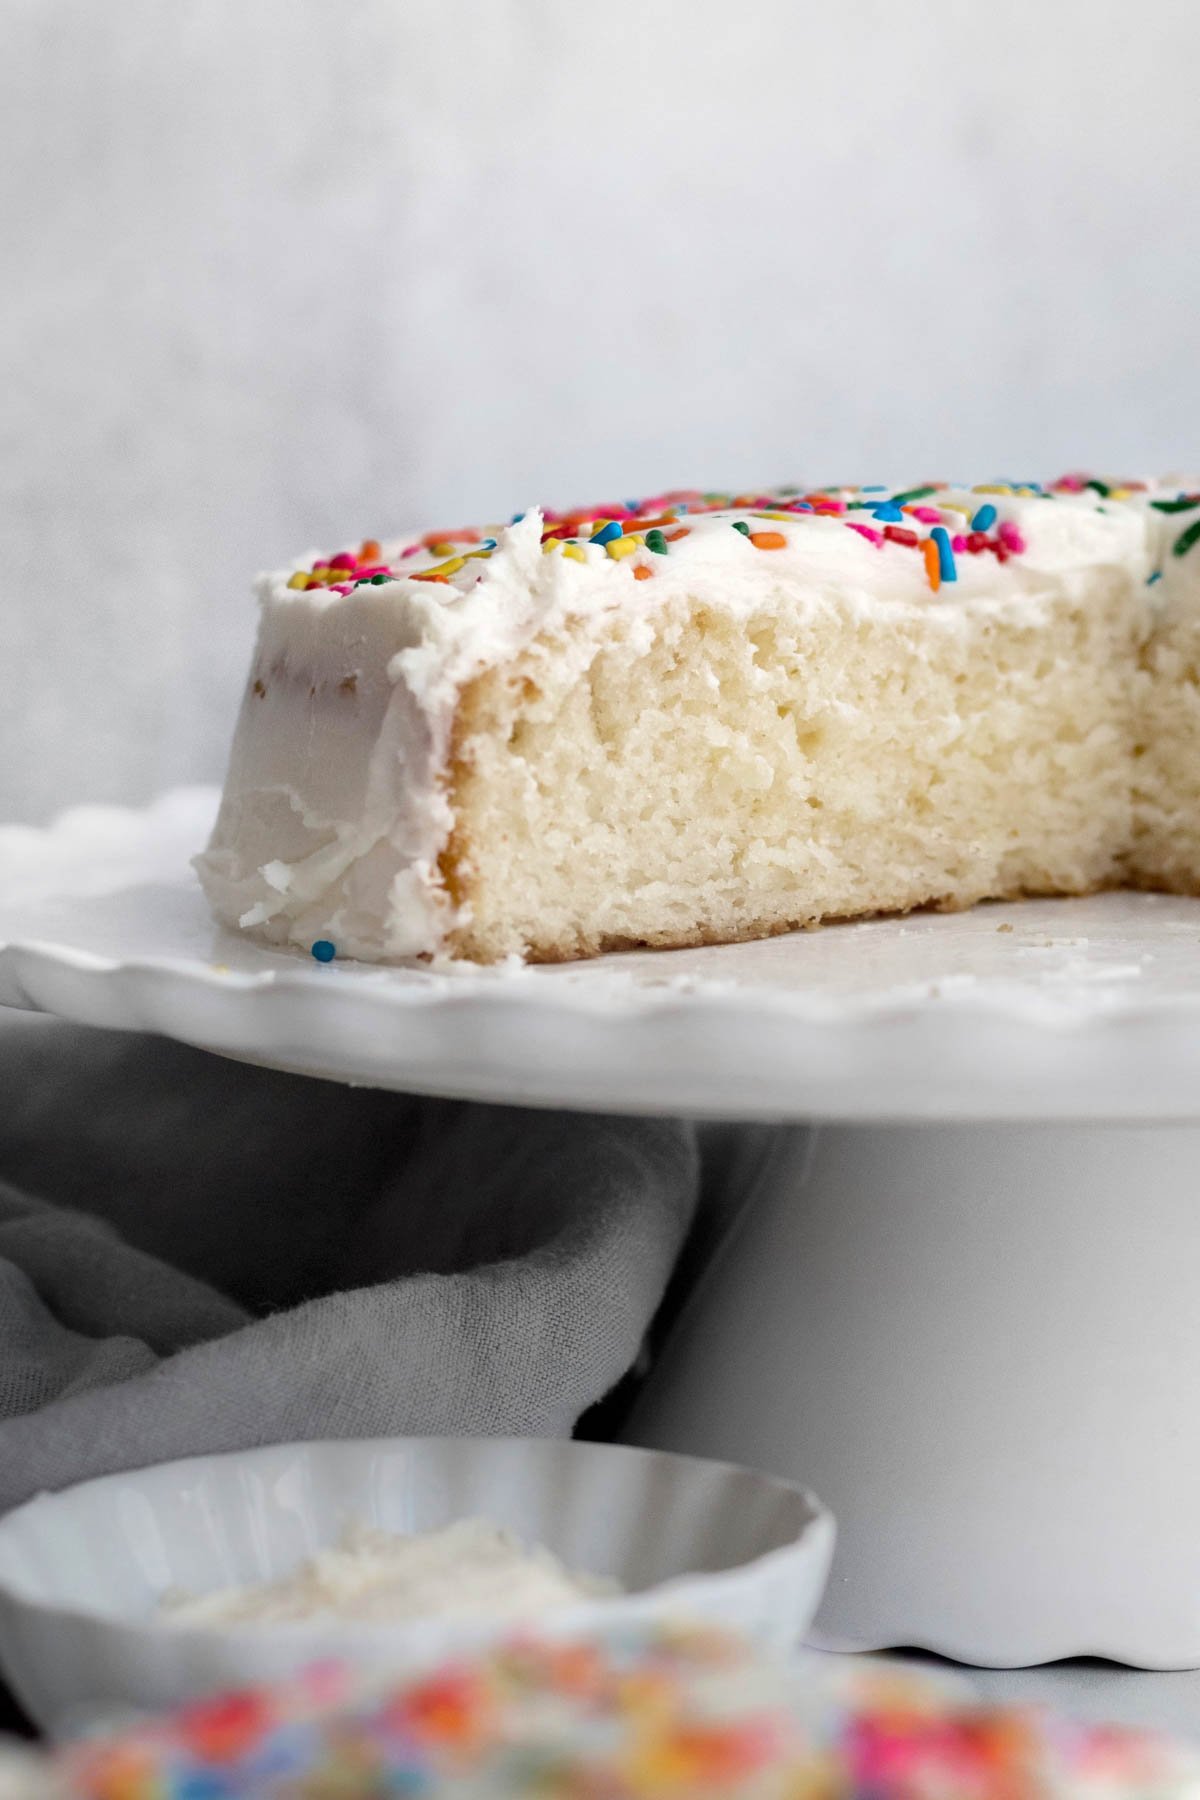 A look inside the light and fluffy cake.